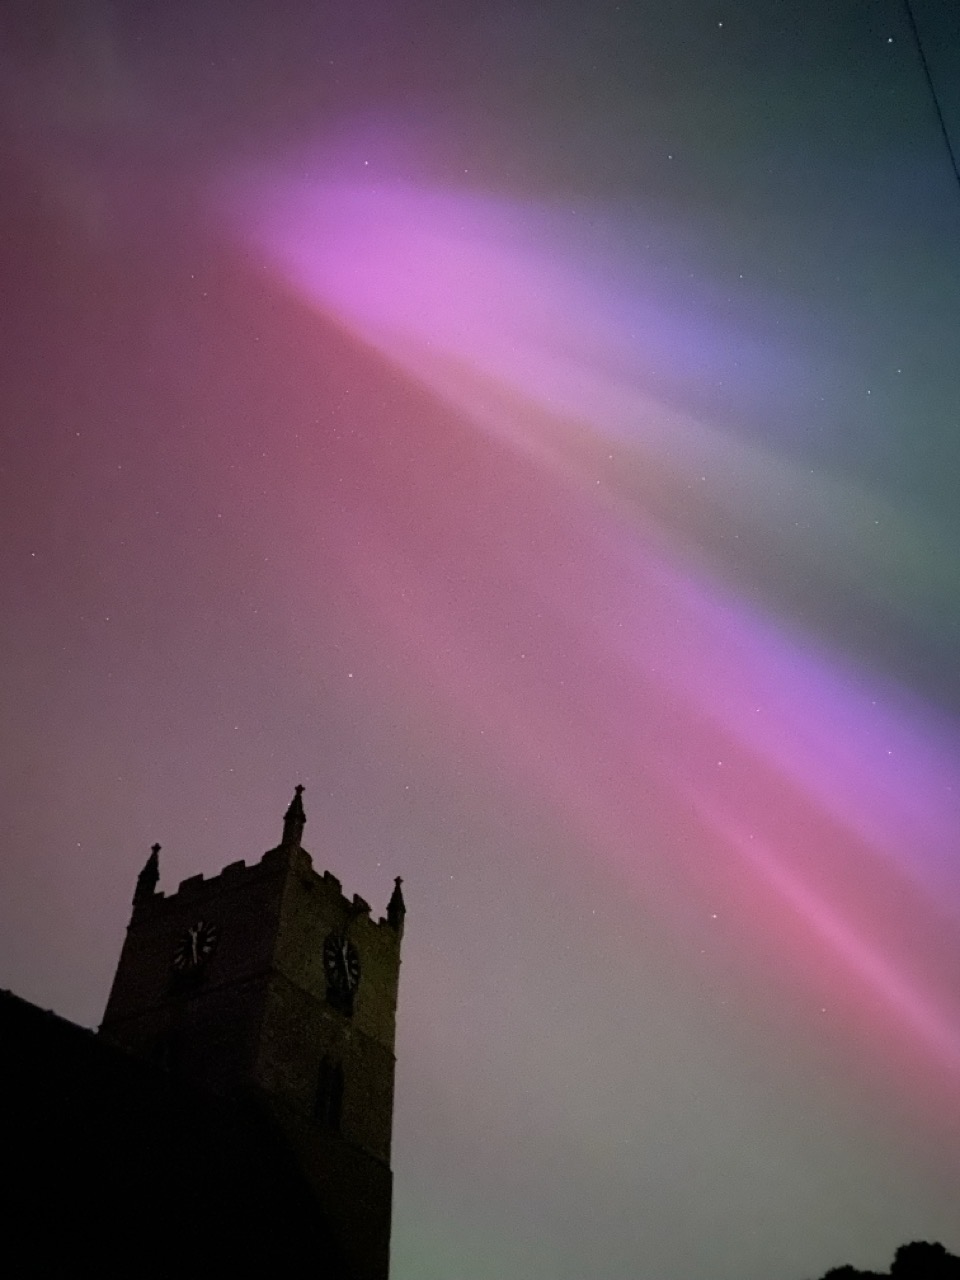 Northern lights with the silhouette of a church spire